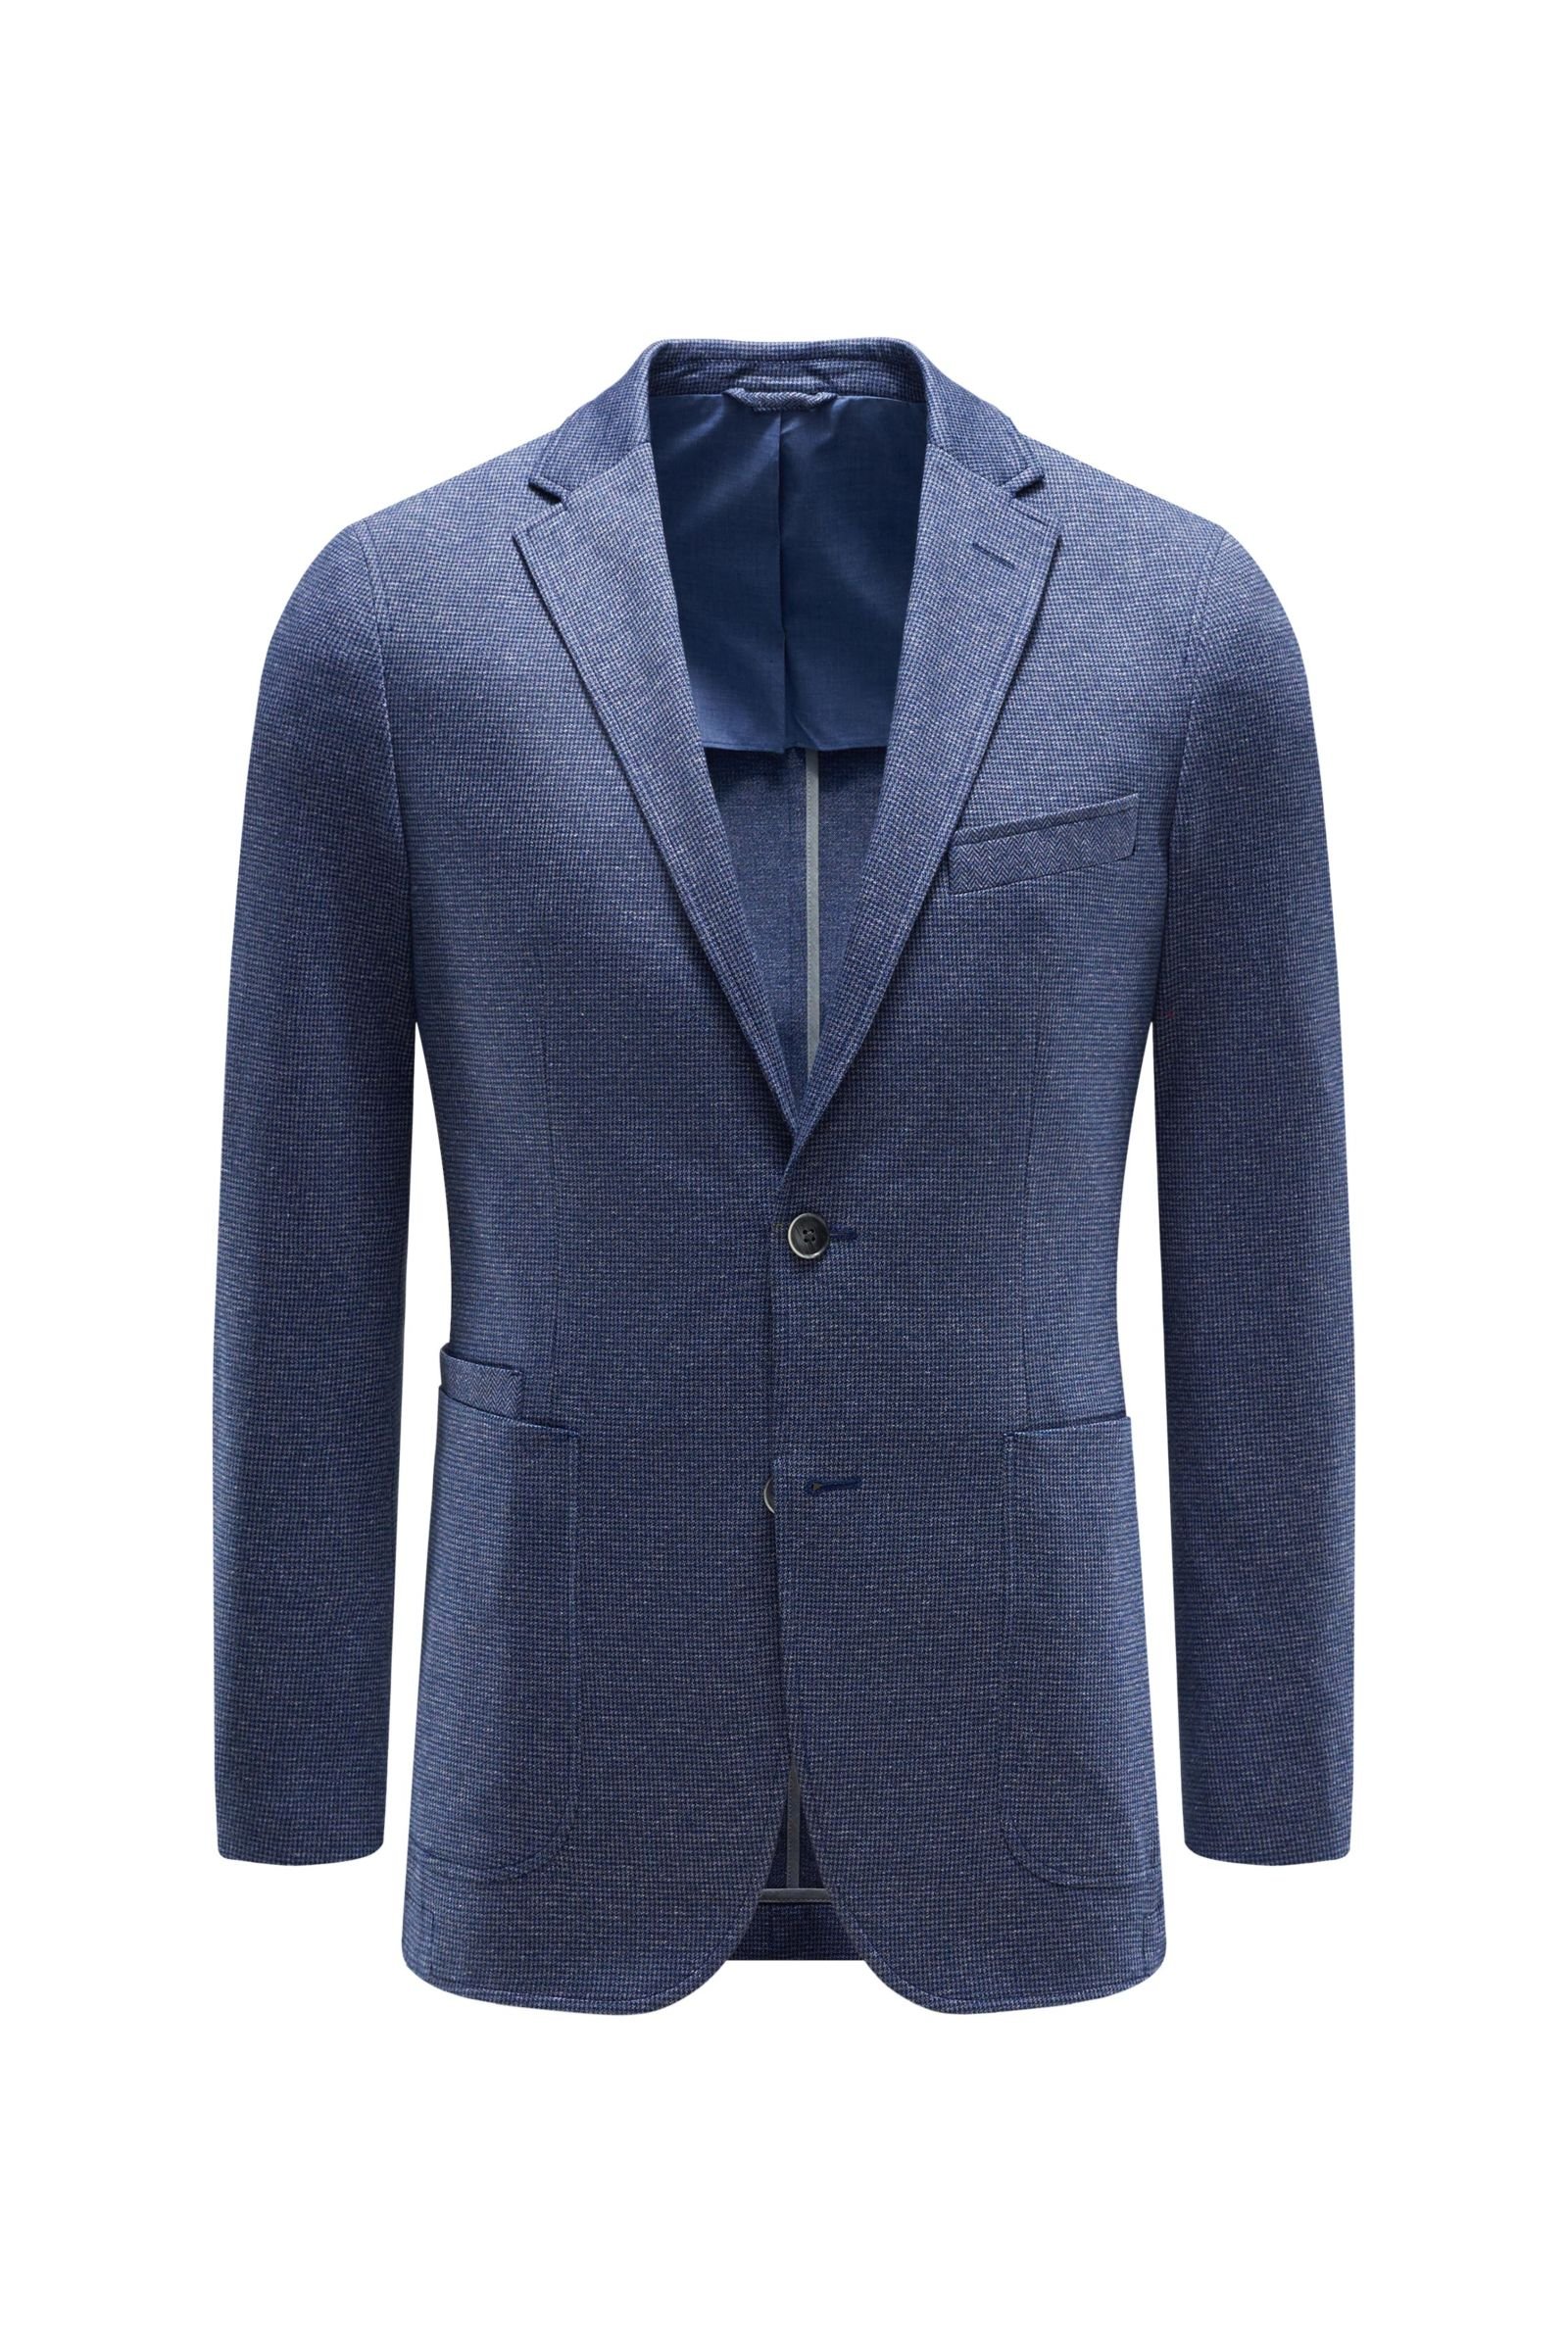 Smart-casual jacket grey-blue checked